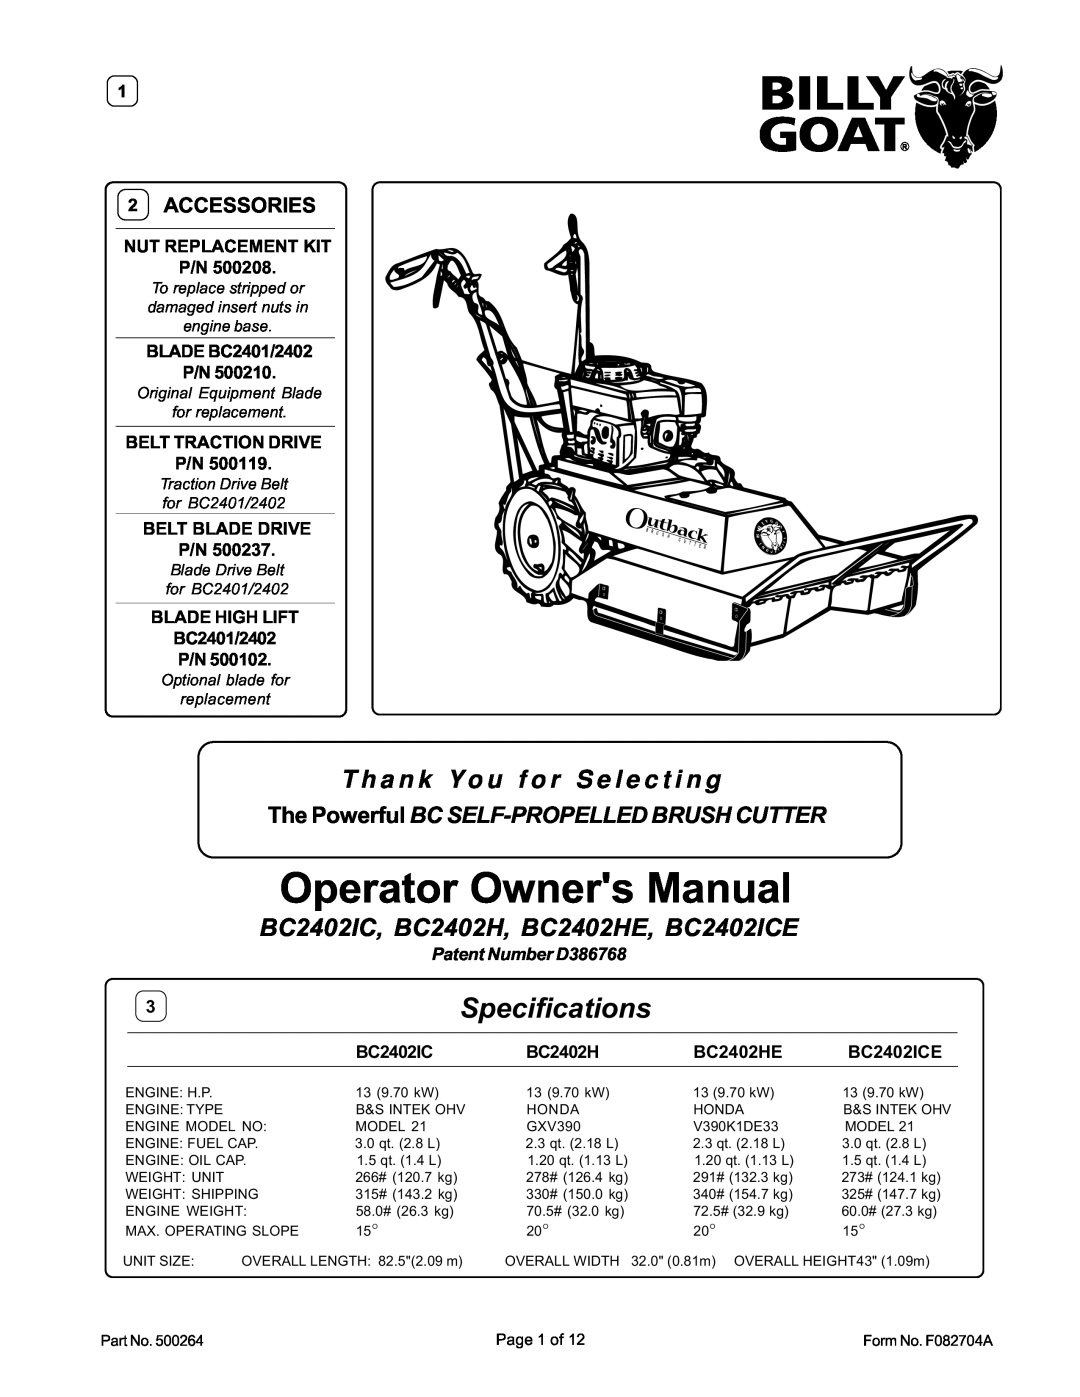 Billy Goat BC2402IC, BC2402H, BC2402HE, BC2402ICE owner manual Specifications, Accessories, Operator Owners Manual 